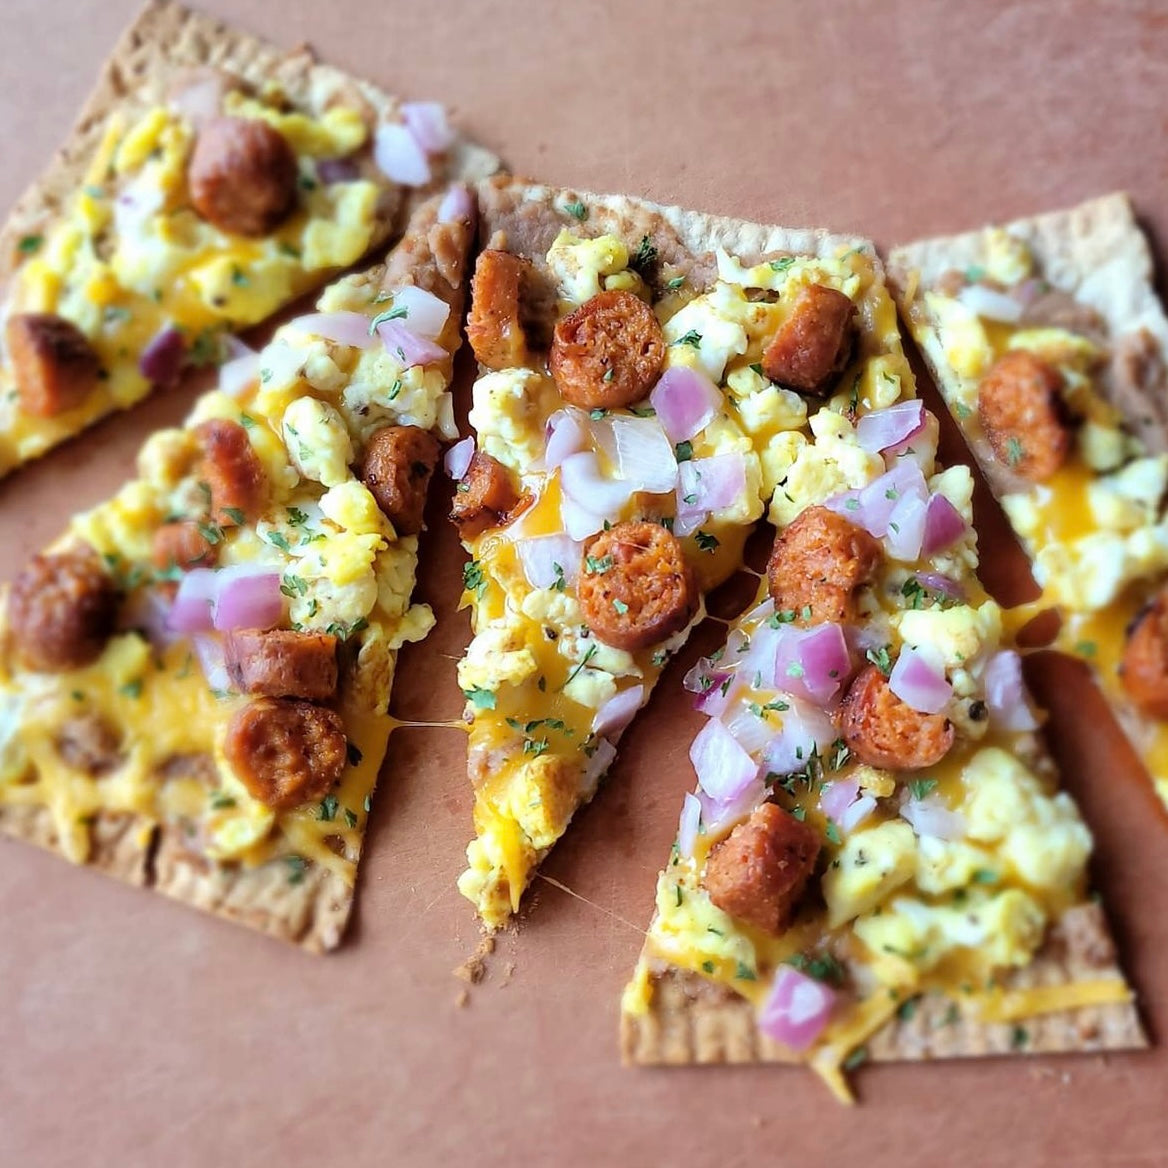 Five slices of thin crust pizza topped with cut up Spicy Breakfast Sausage Links, onions and cheese.